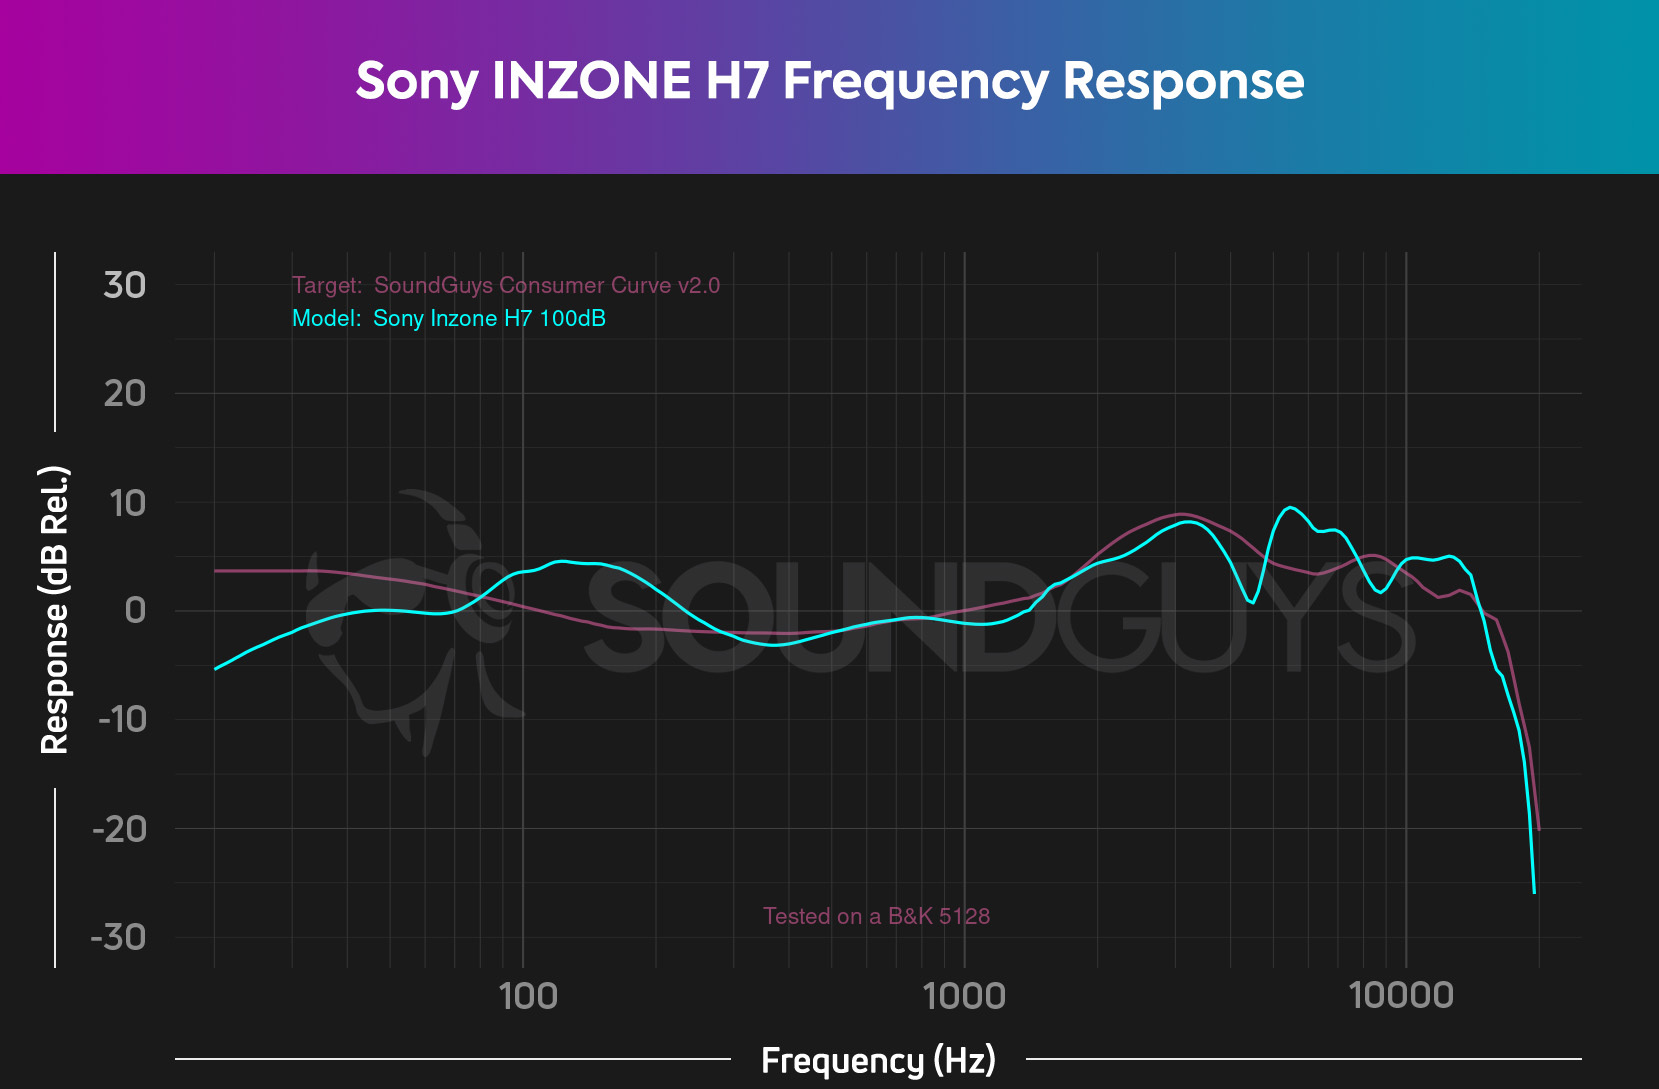 The Sony INZONE H7 frequency response curve, showing a slight midrange emphasis.